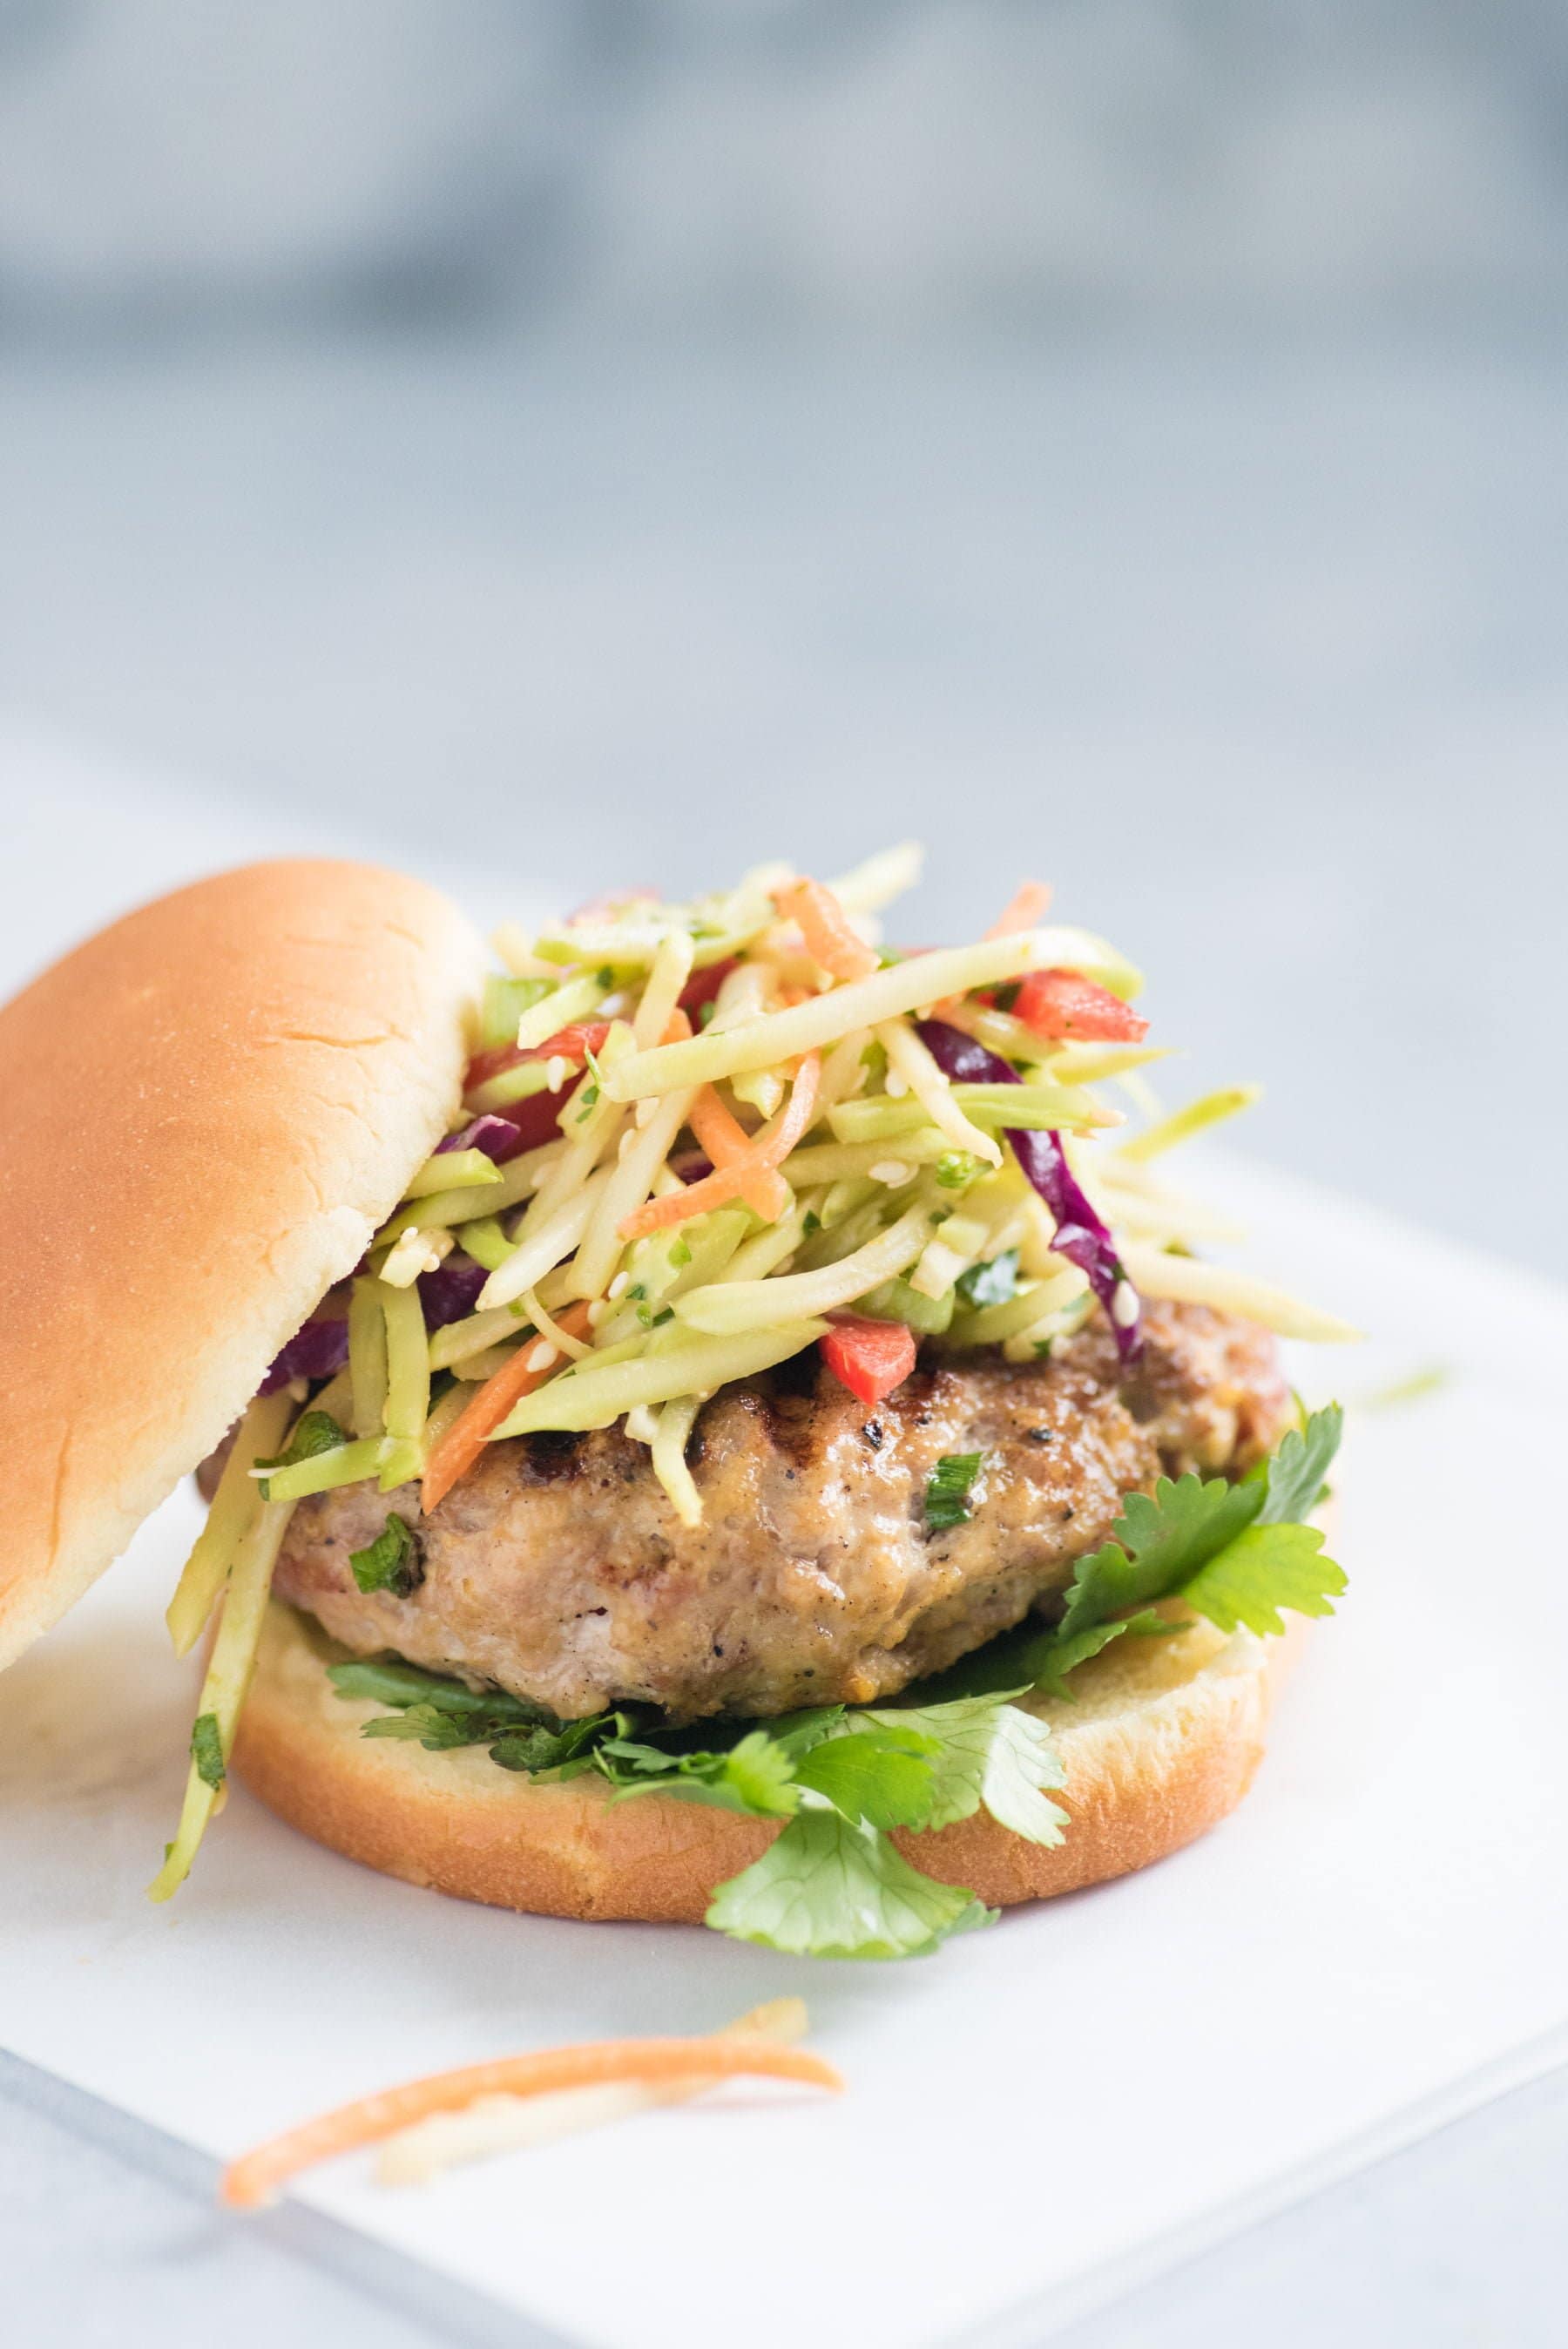 Close up side shot of Asian pork burger with broccoli slaw on top, served on a bun